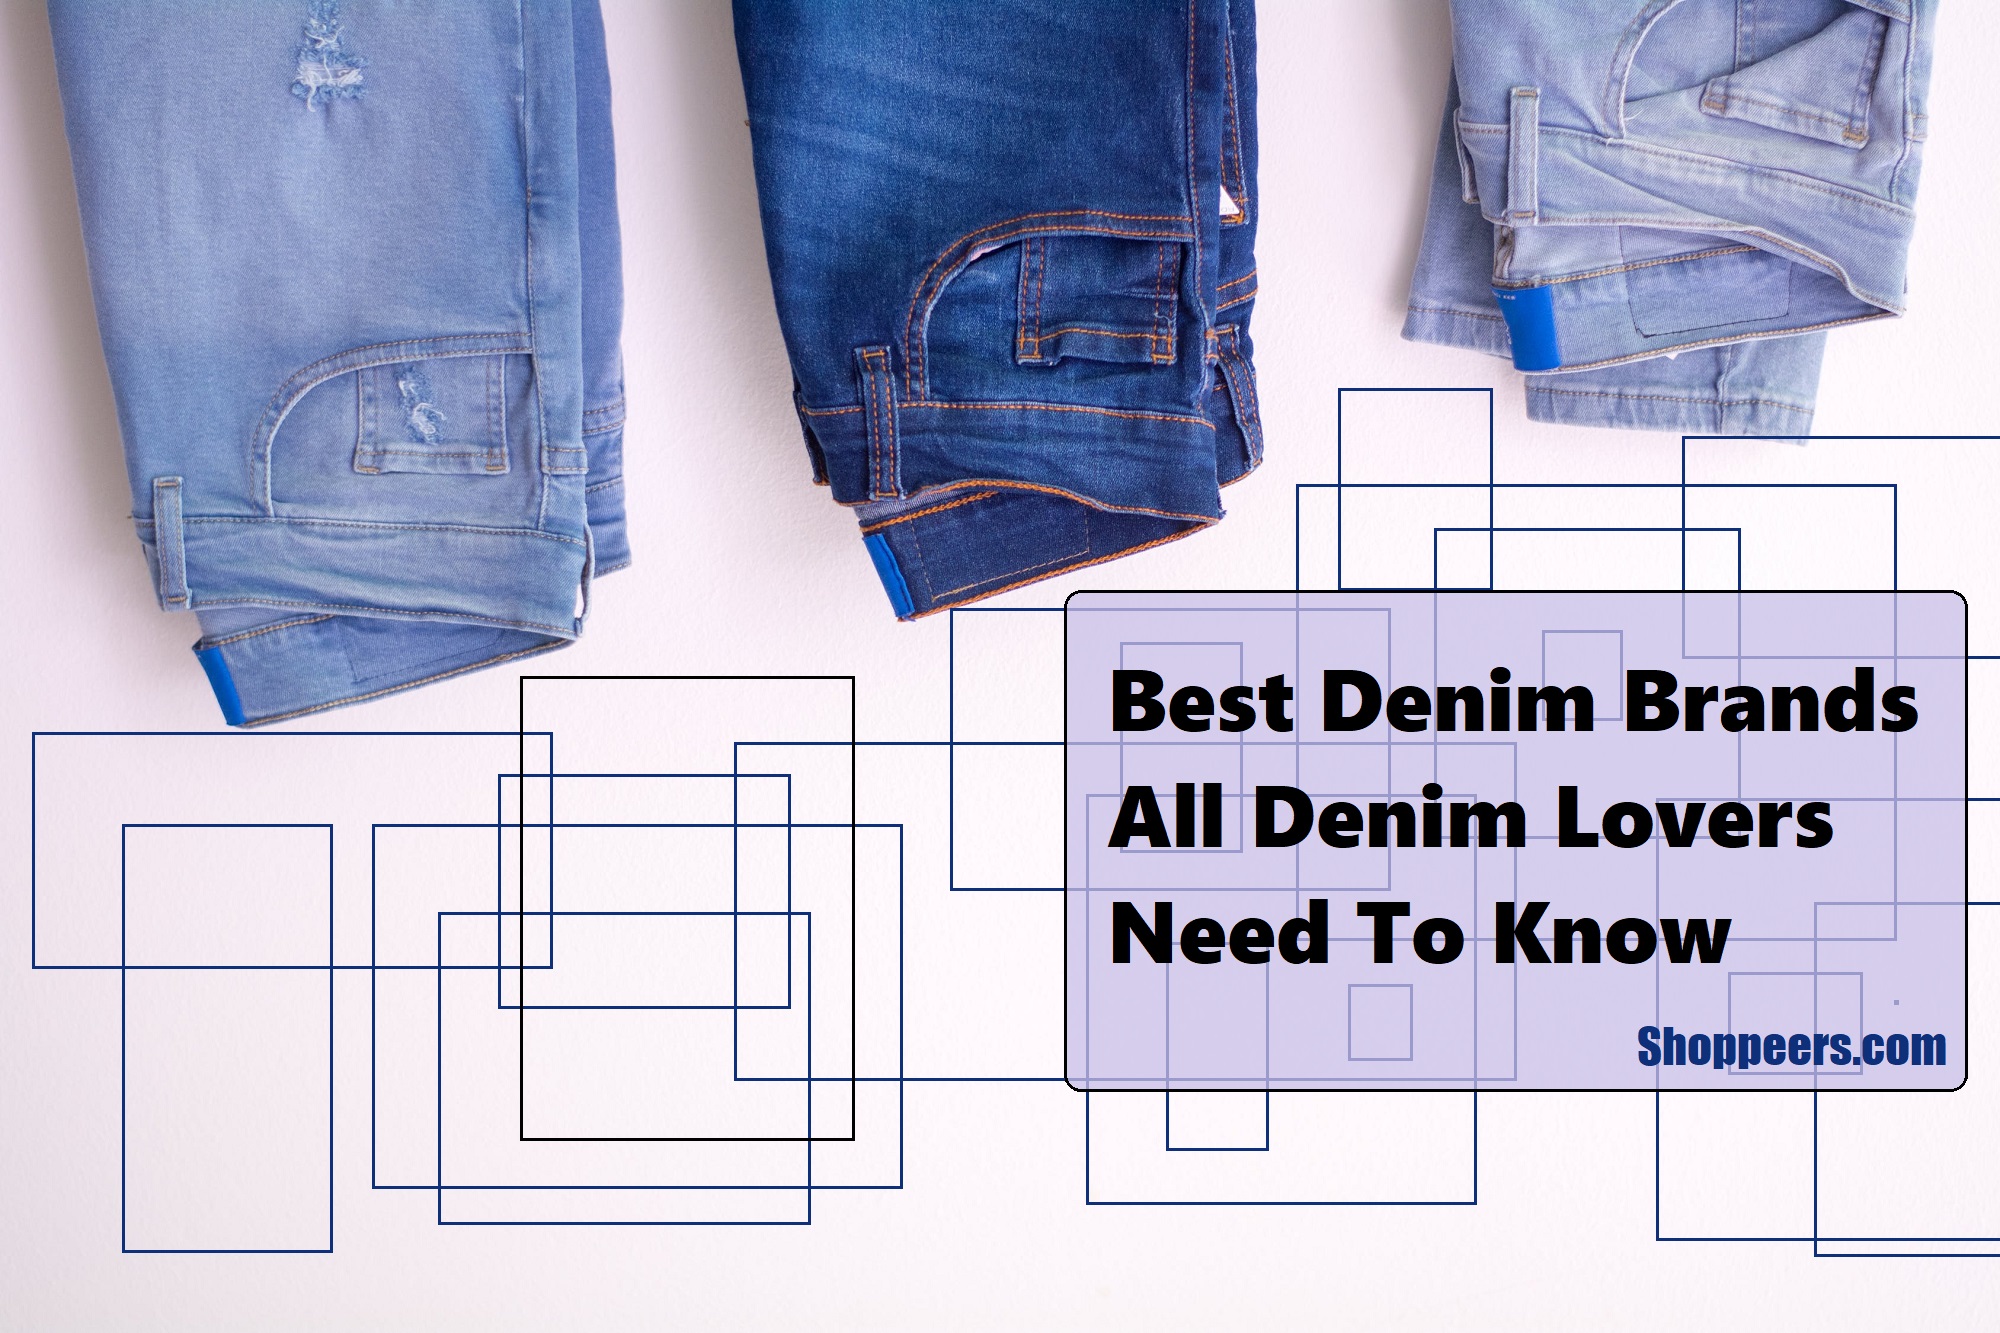 Best Denim Brands All Denim Lovers Need To Know Shoppeers